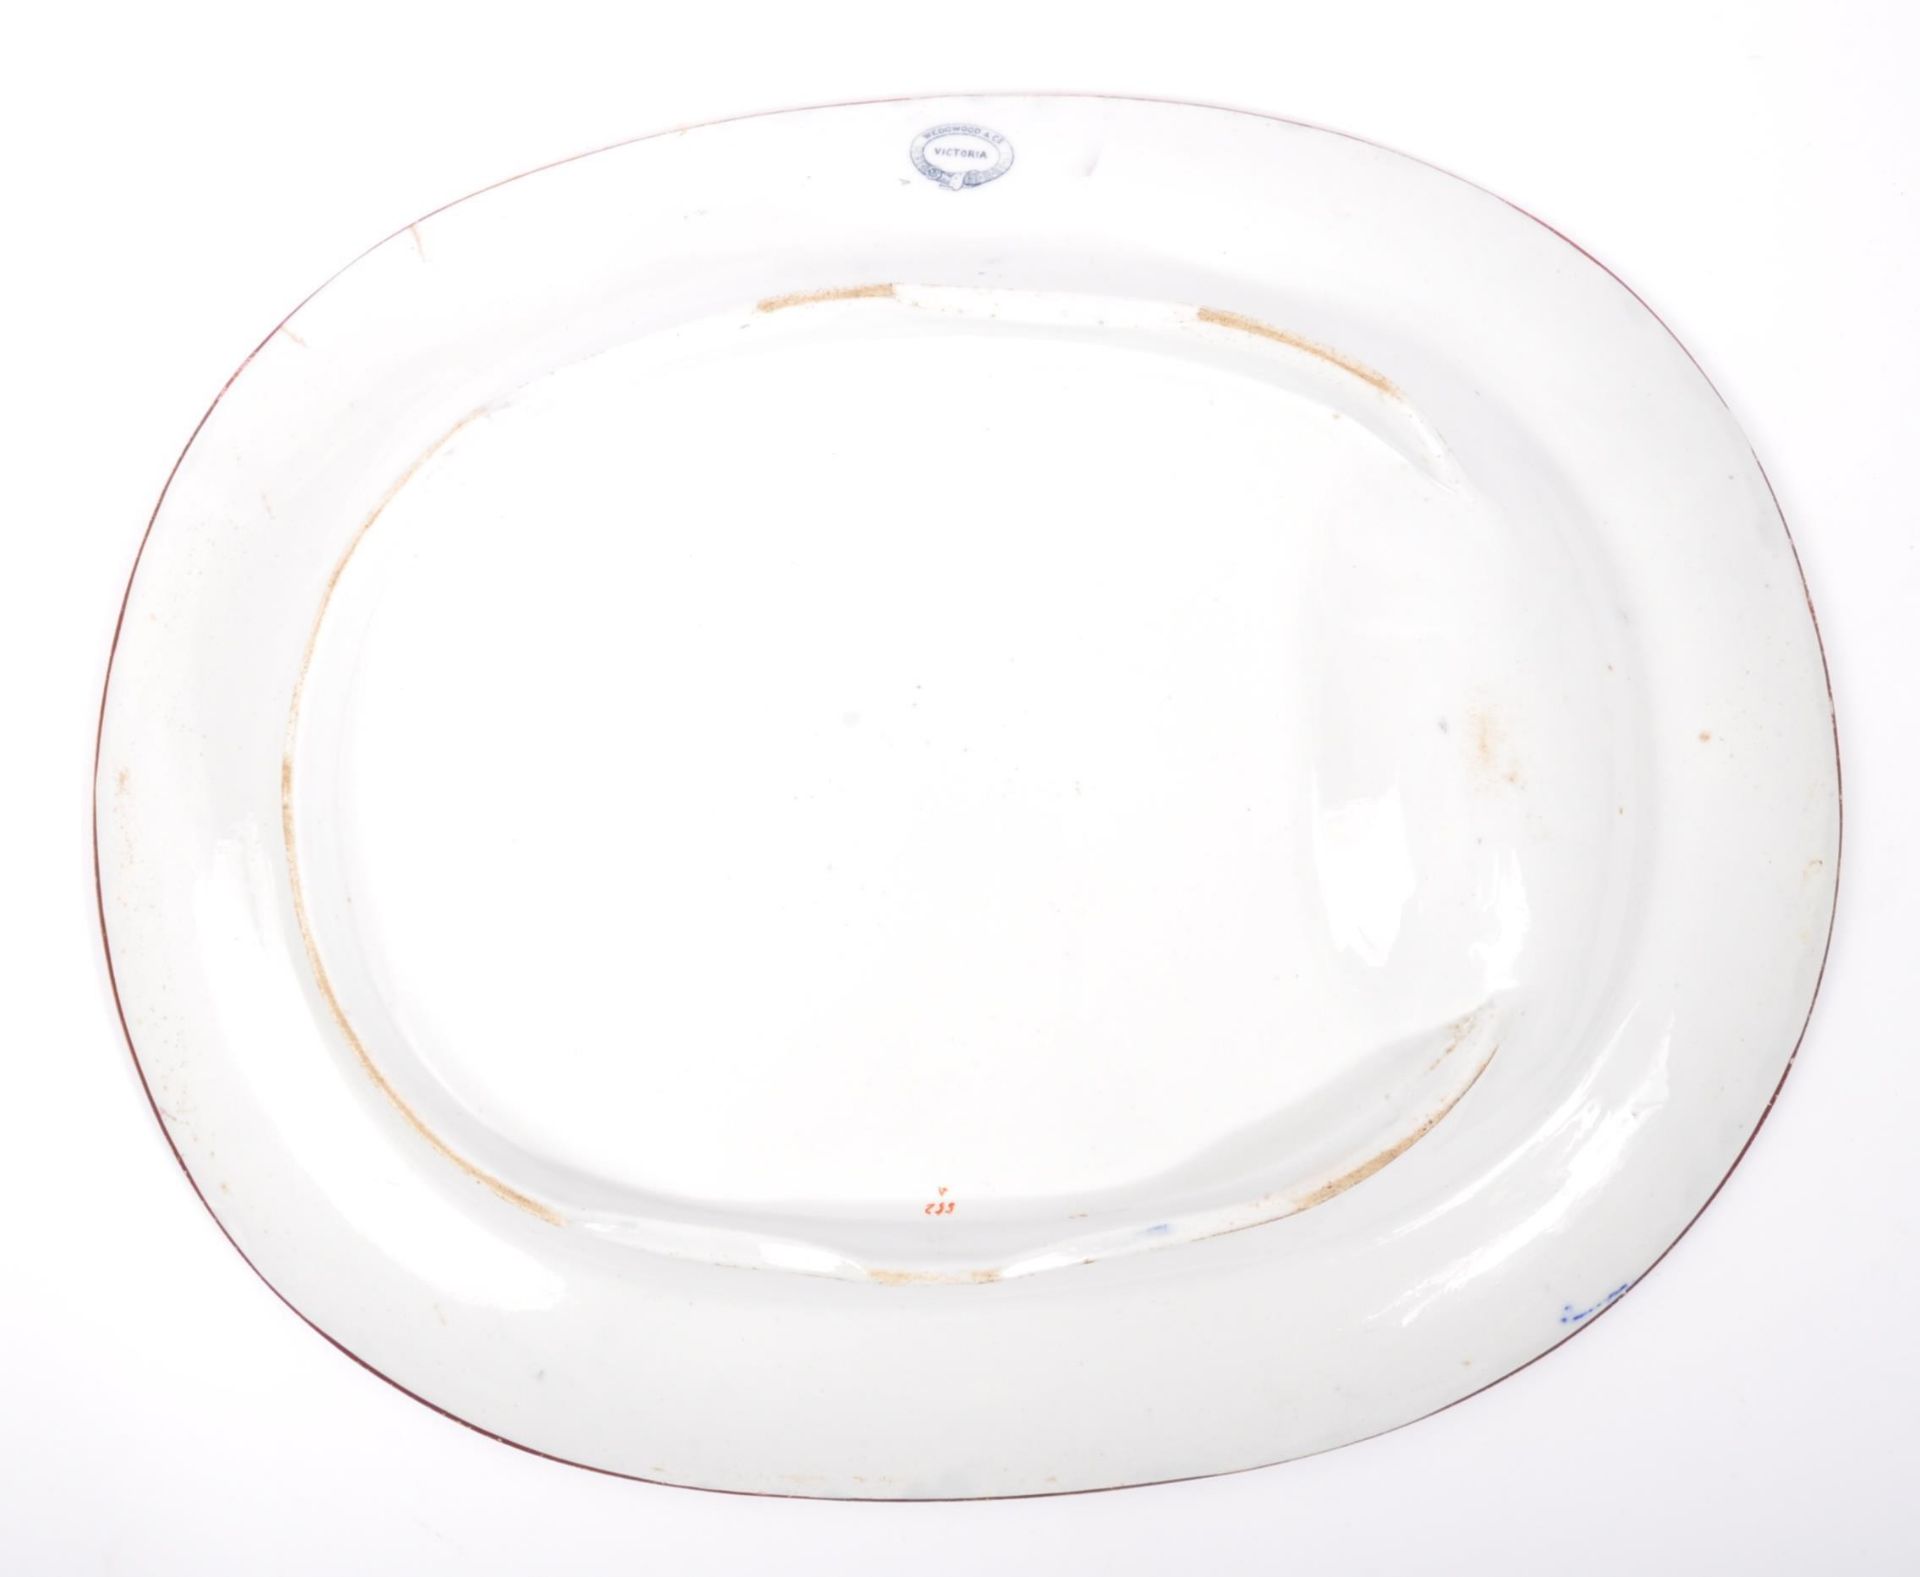 EARLY 20TH CENTURY WEDGWOOD VICTORIA MEAT SERVING PLATE - Image 6 of 8